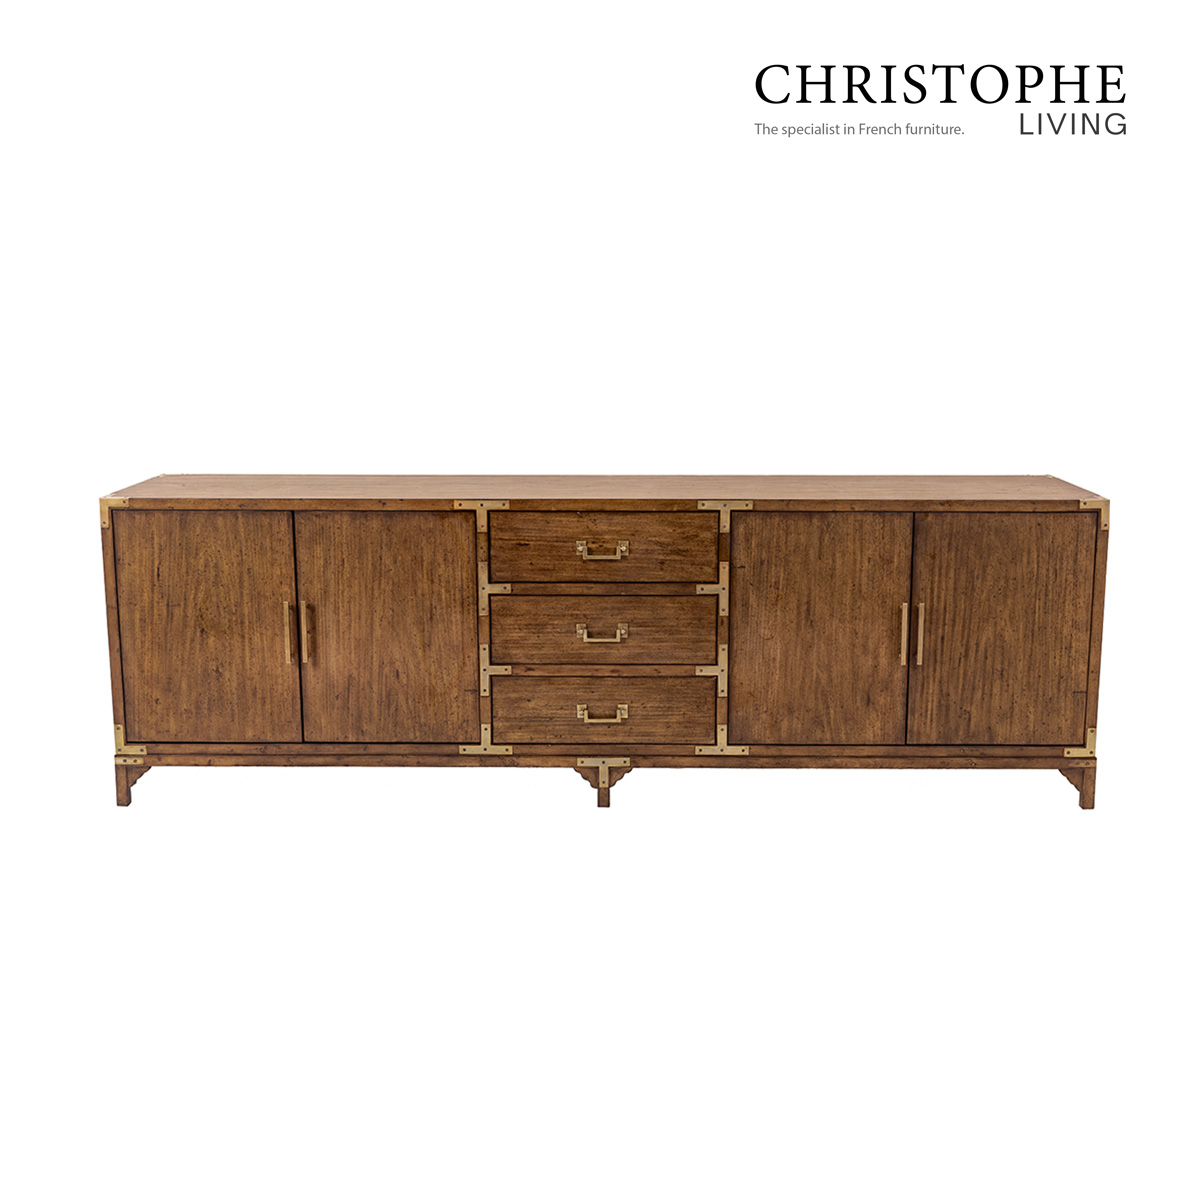 Holland Classic French Provincial Living Room Media Unit in Warm Natural Timber Stain with Brass Hardware